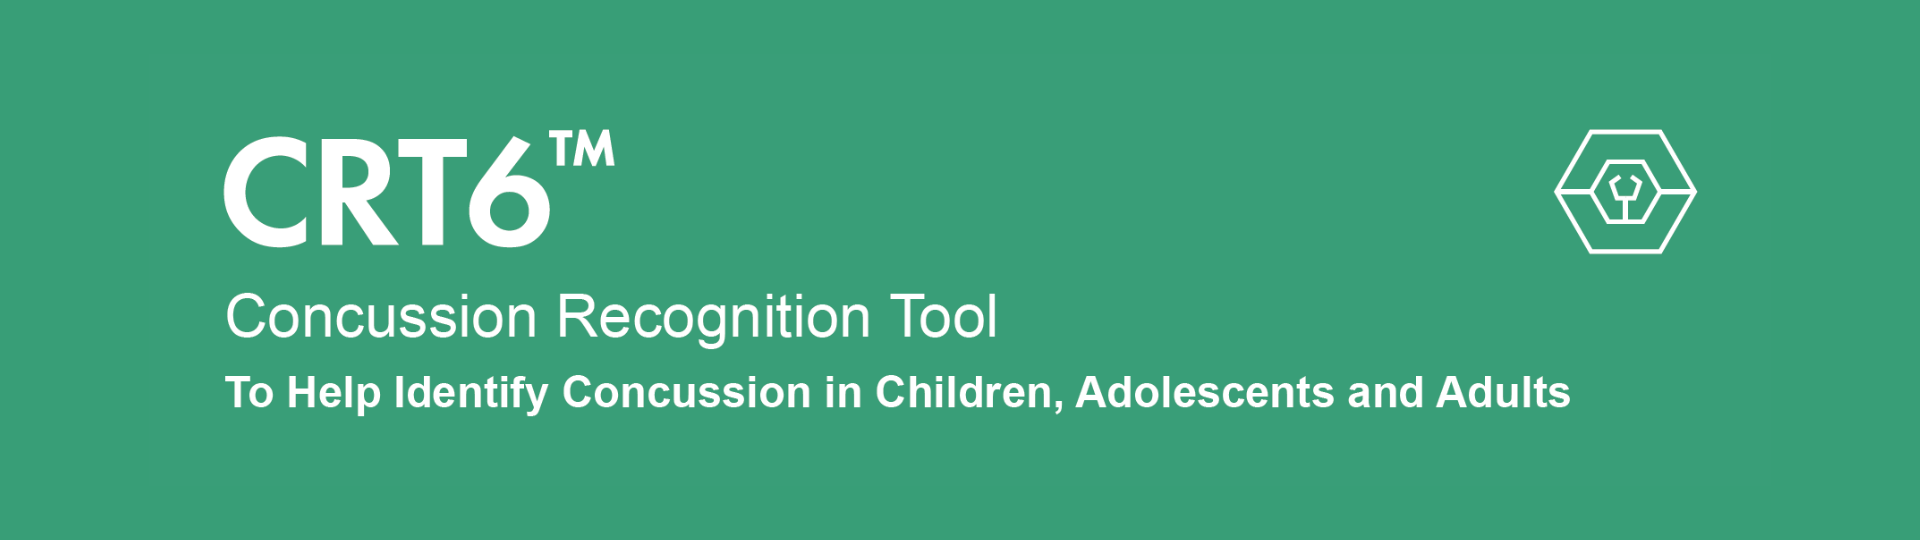 Concussion Recognition Tool